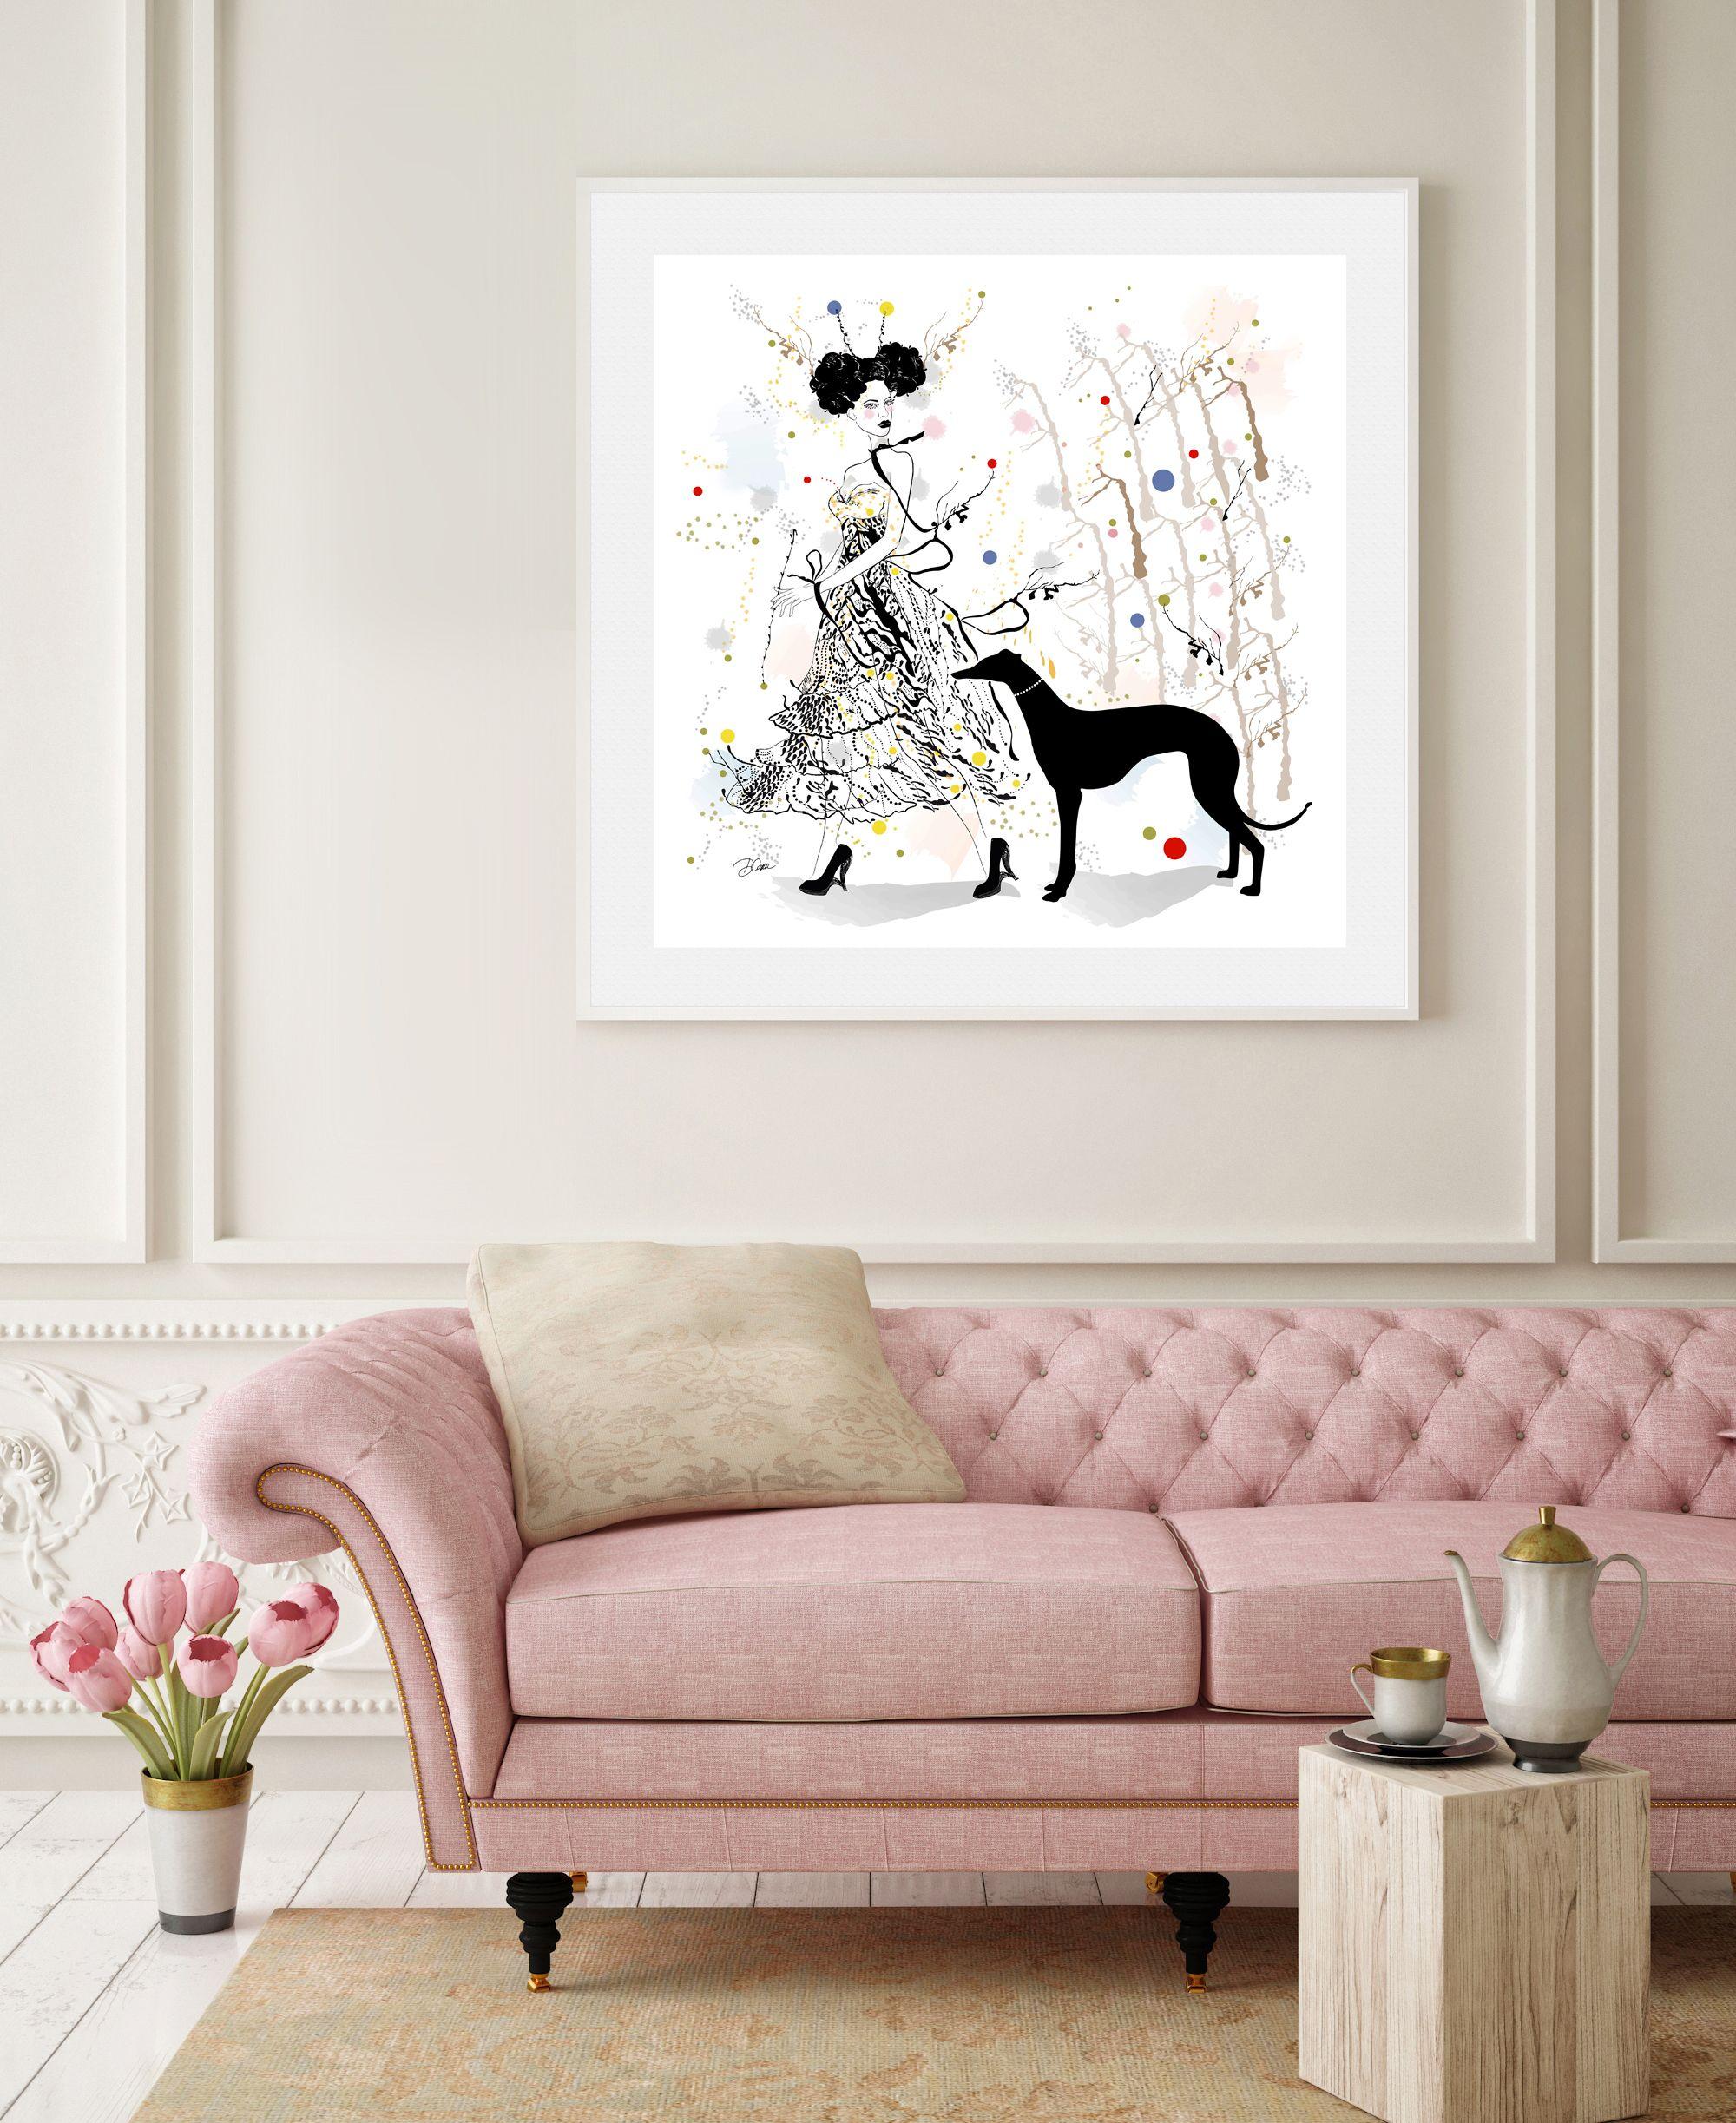 Juliette and her Greyhound - Dog sitter - Fashion, Drawing, Pen & Ink on Paper - Other Art Style Art by Artemisia Fine Art